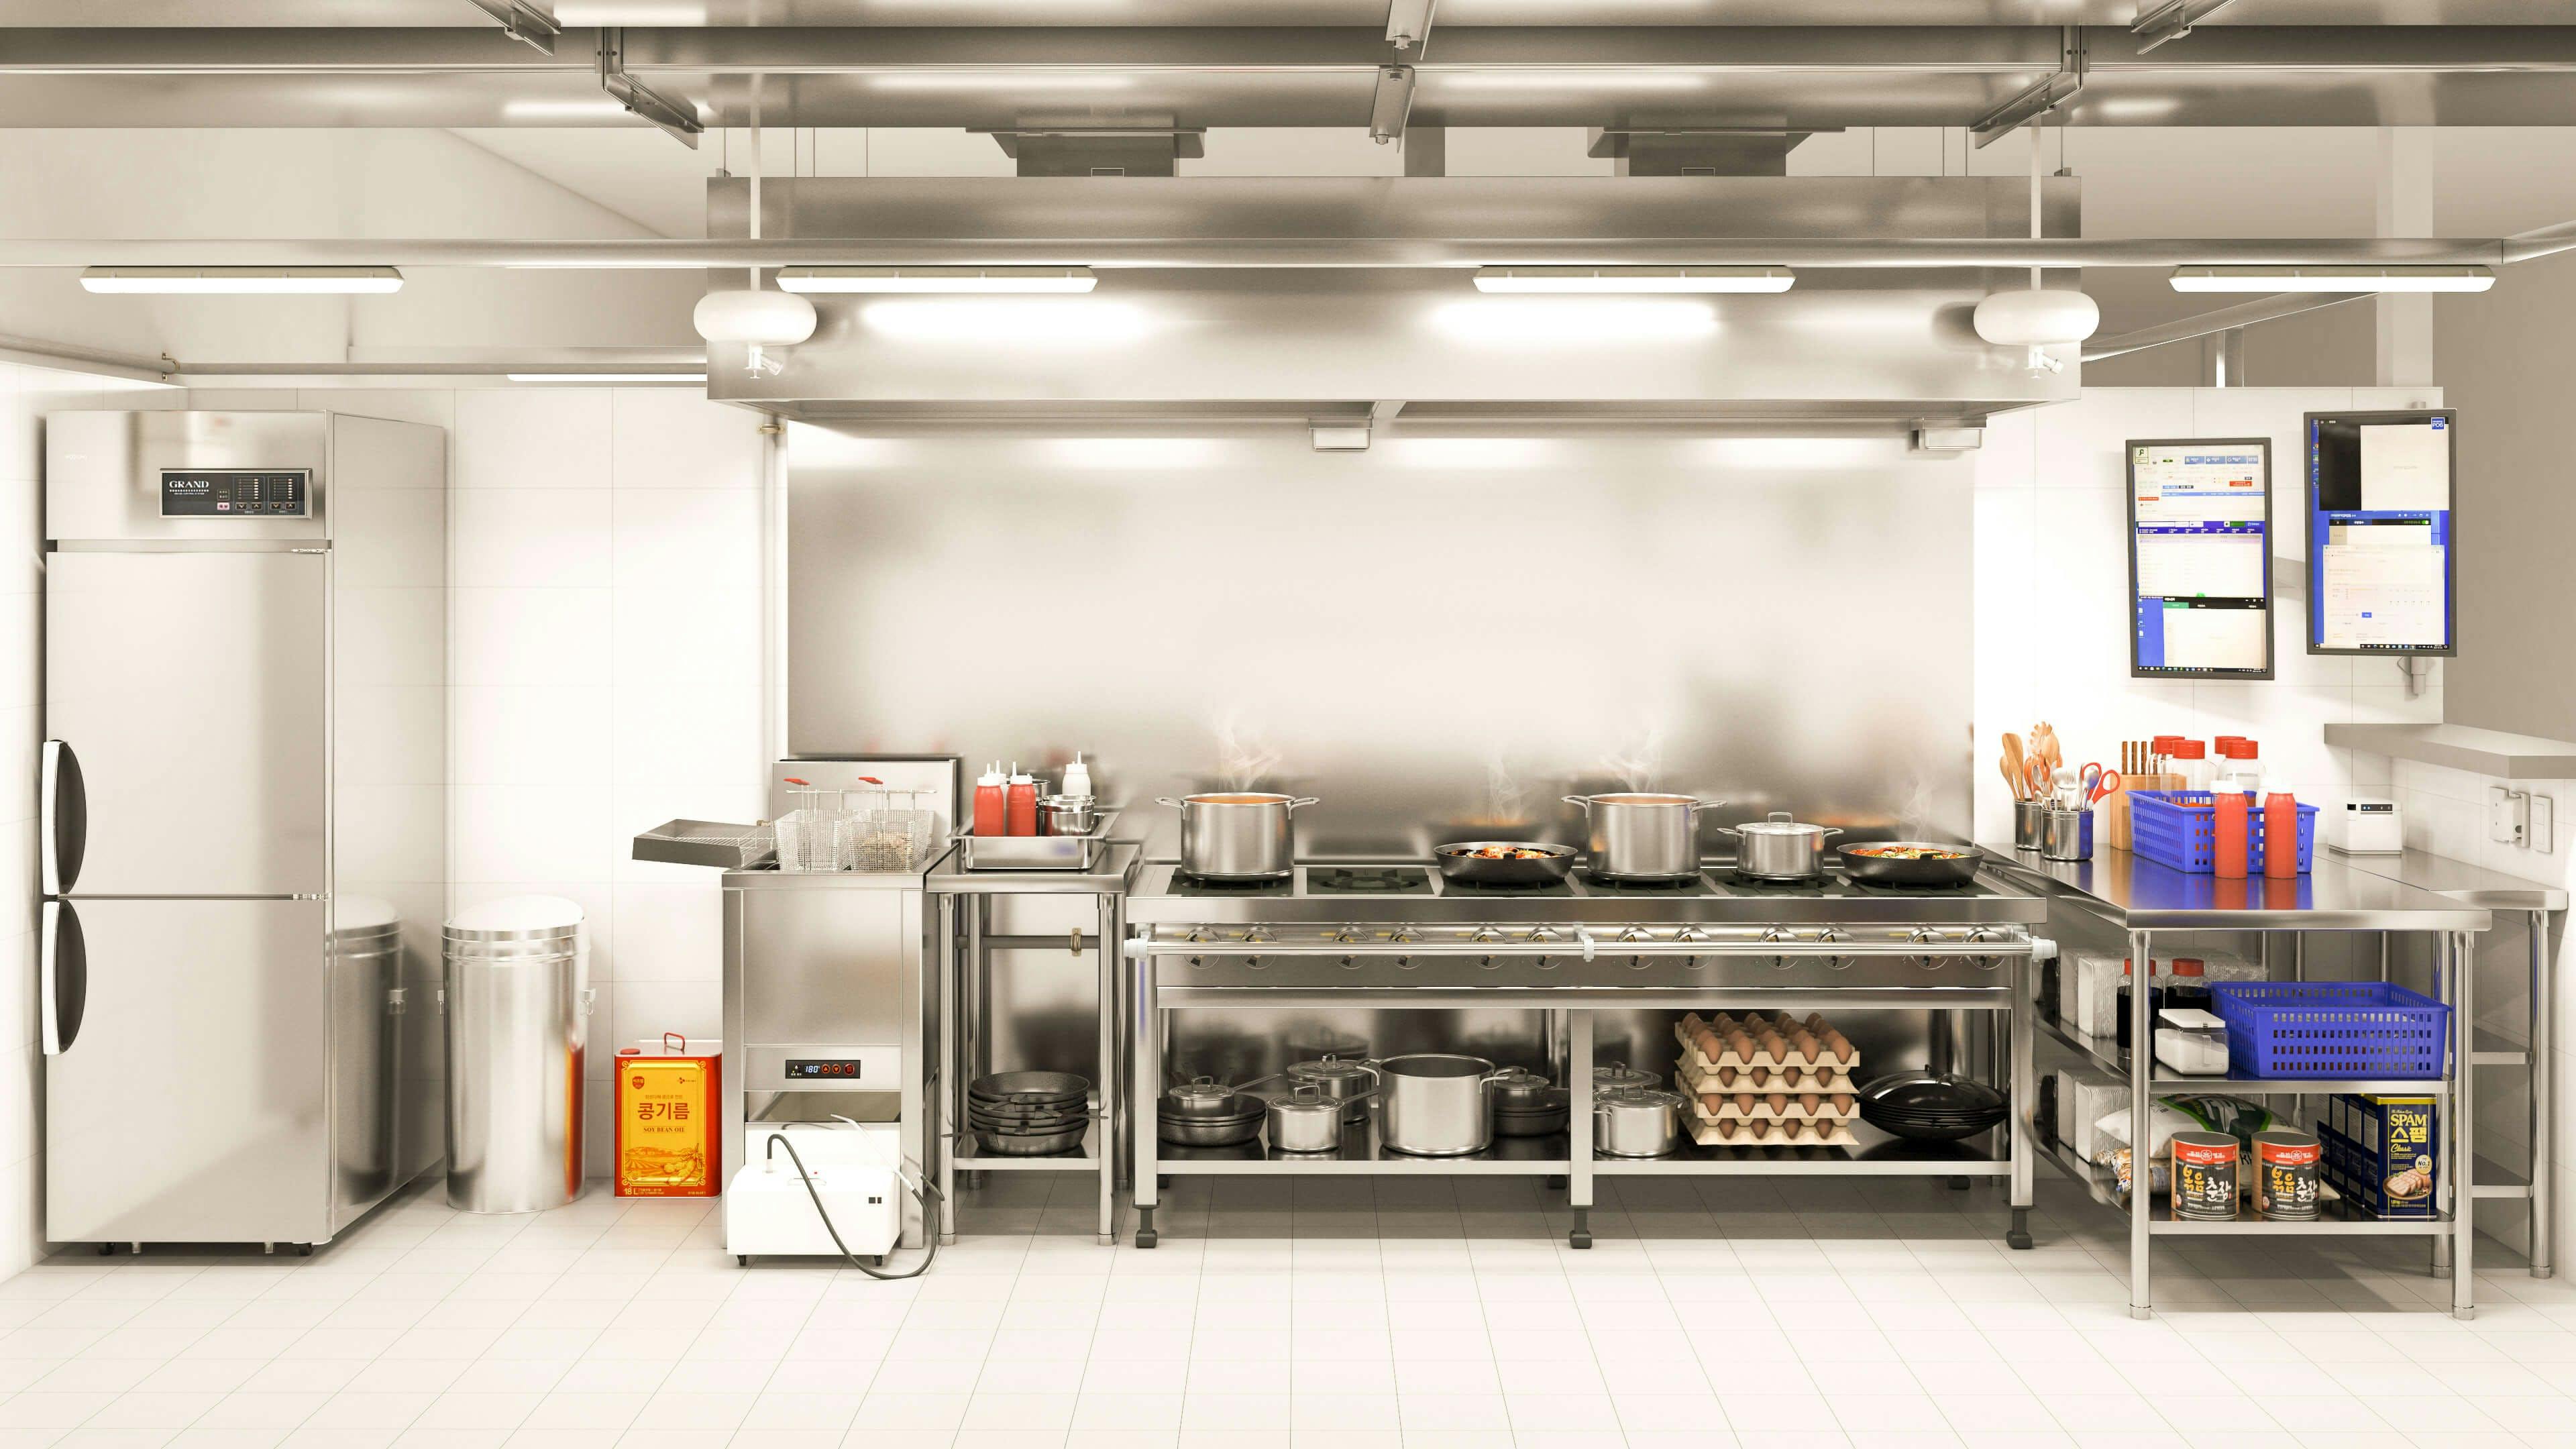 CloudKitchens Franchise: The Key to Restaurant Expansion